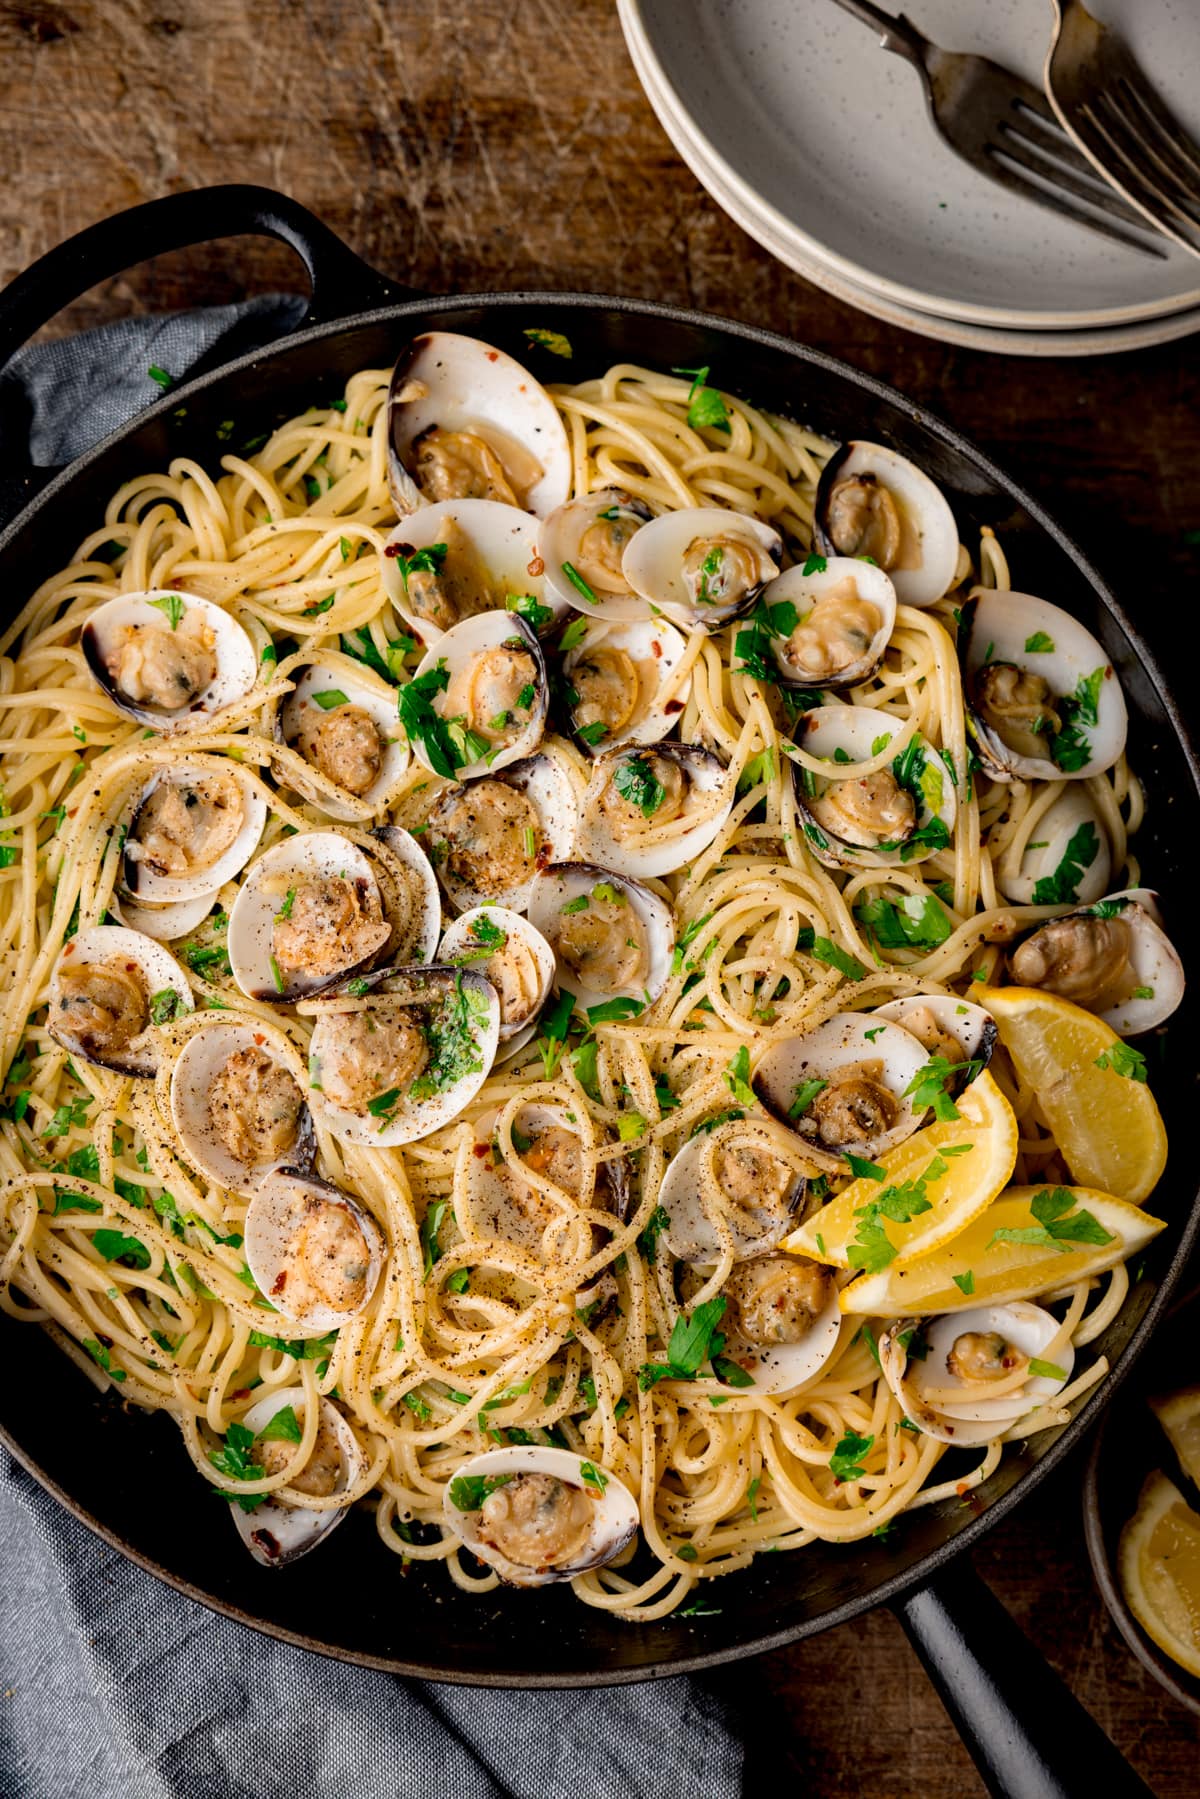 Tall overhead image of Spaghetti Vongole (spaghetti with clams) in a black pan topped with parsley and lemon wedges. The pan is on a wooden table next to a grey napkin. There are two white bowls with forks at the top of the frame.